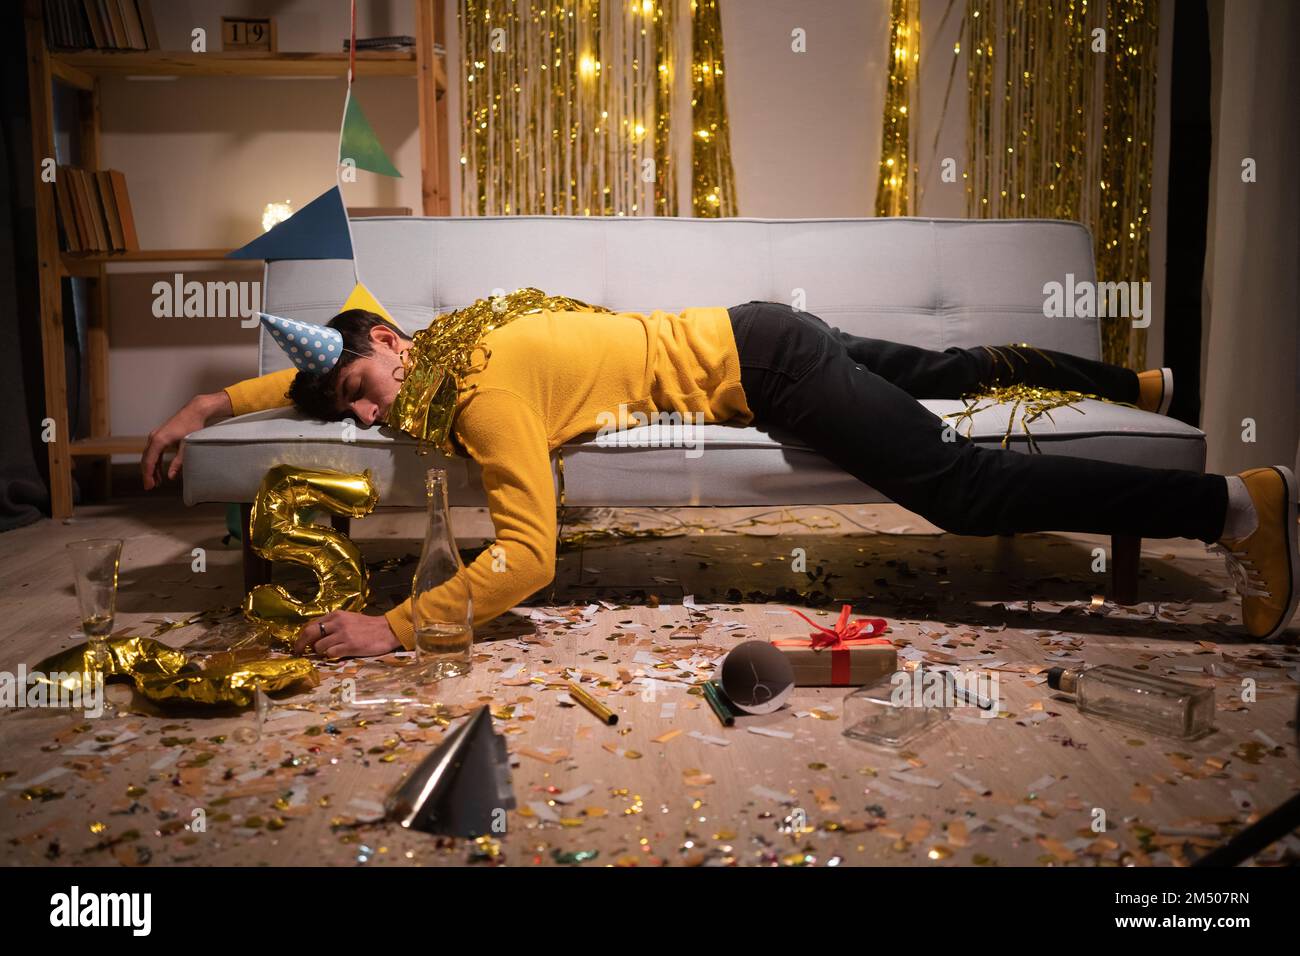 Drunk man sleep in room after birthday party. Copy space Stock Photo